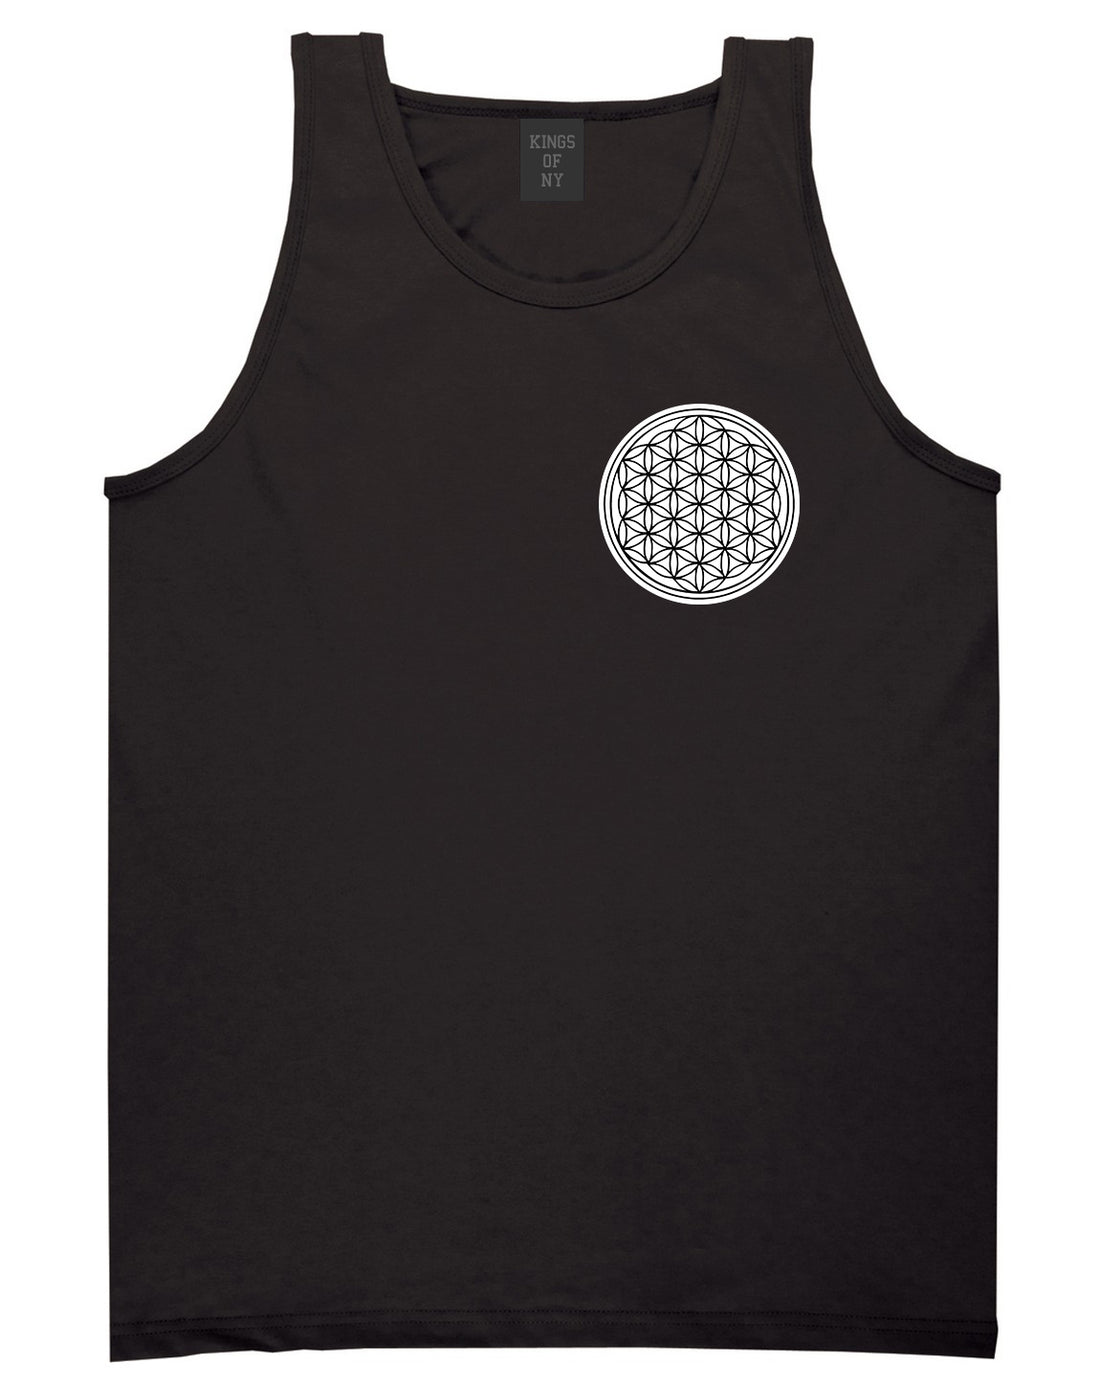 Flower Of Life Chest Mens Black Tank Top Shirt by KINGS OF NY